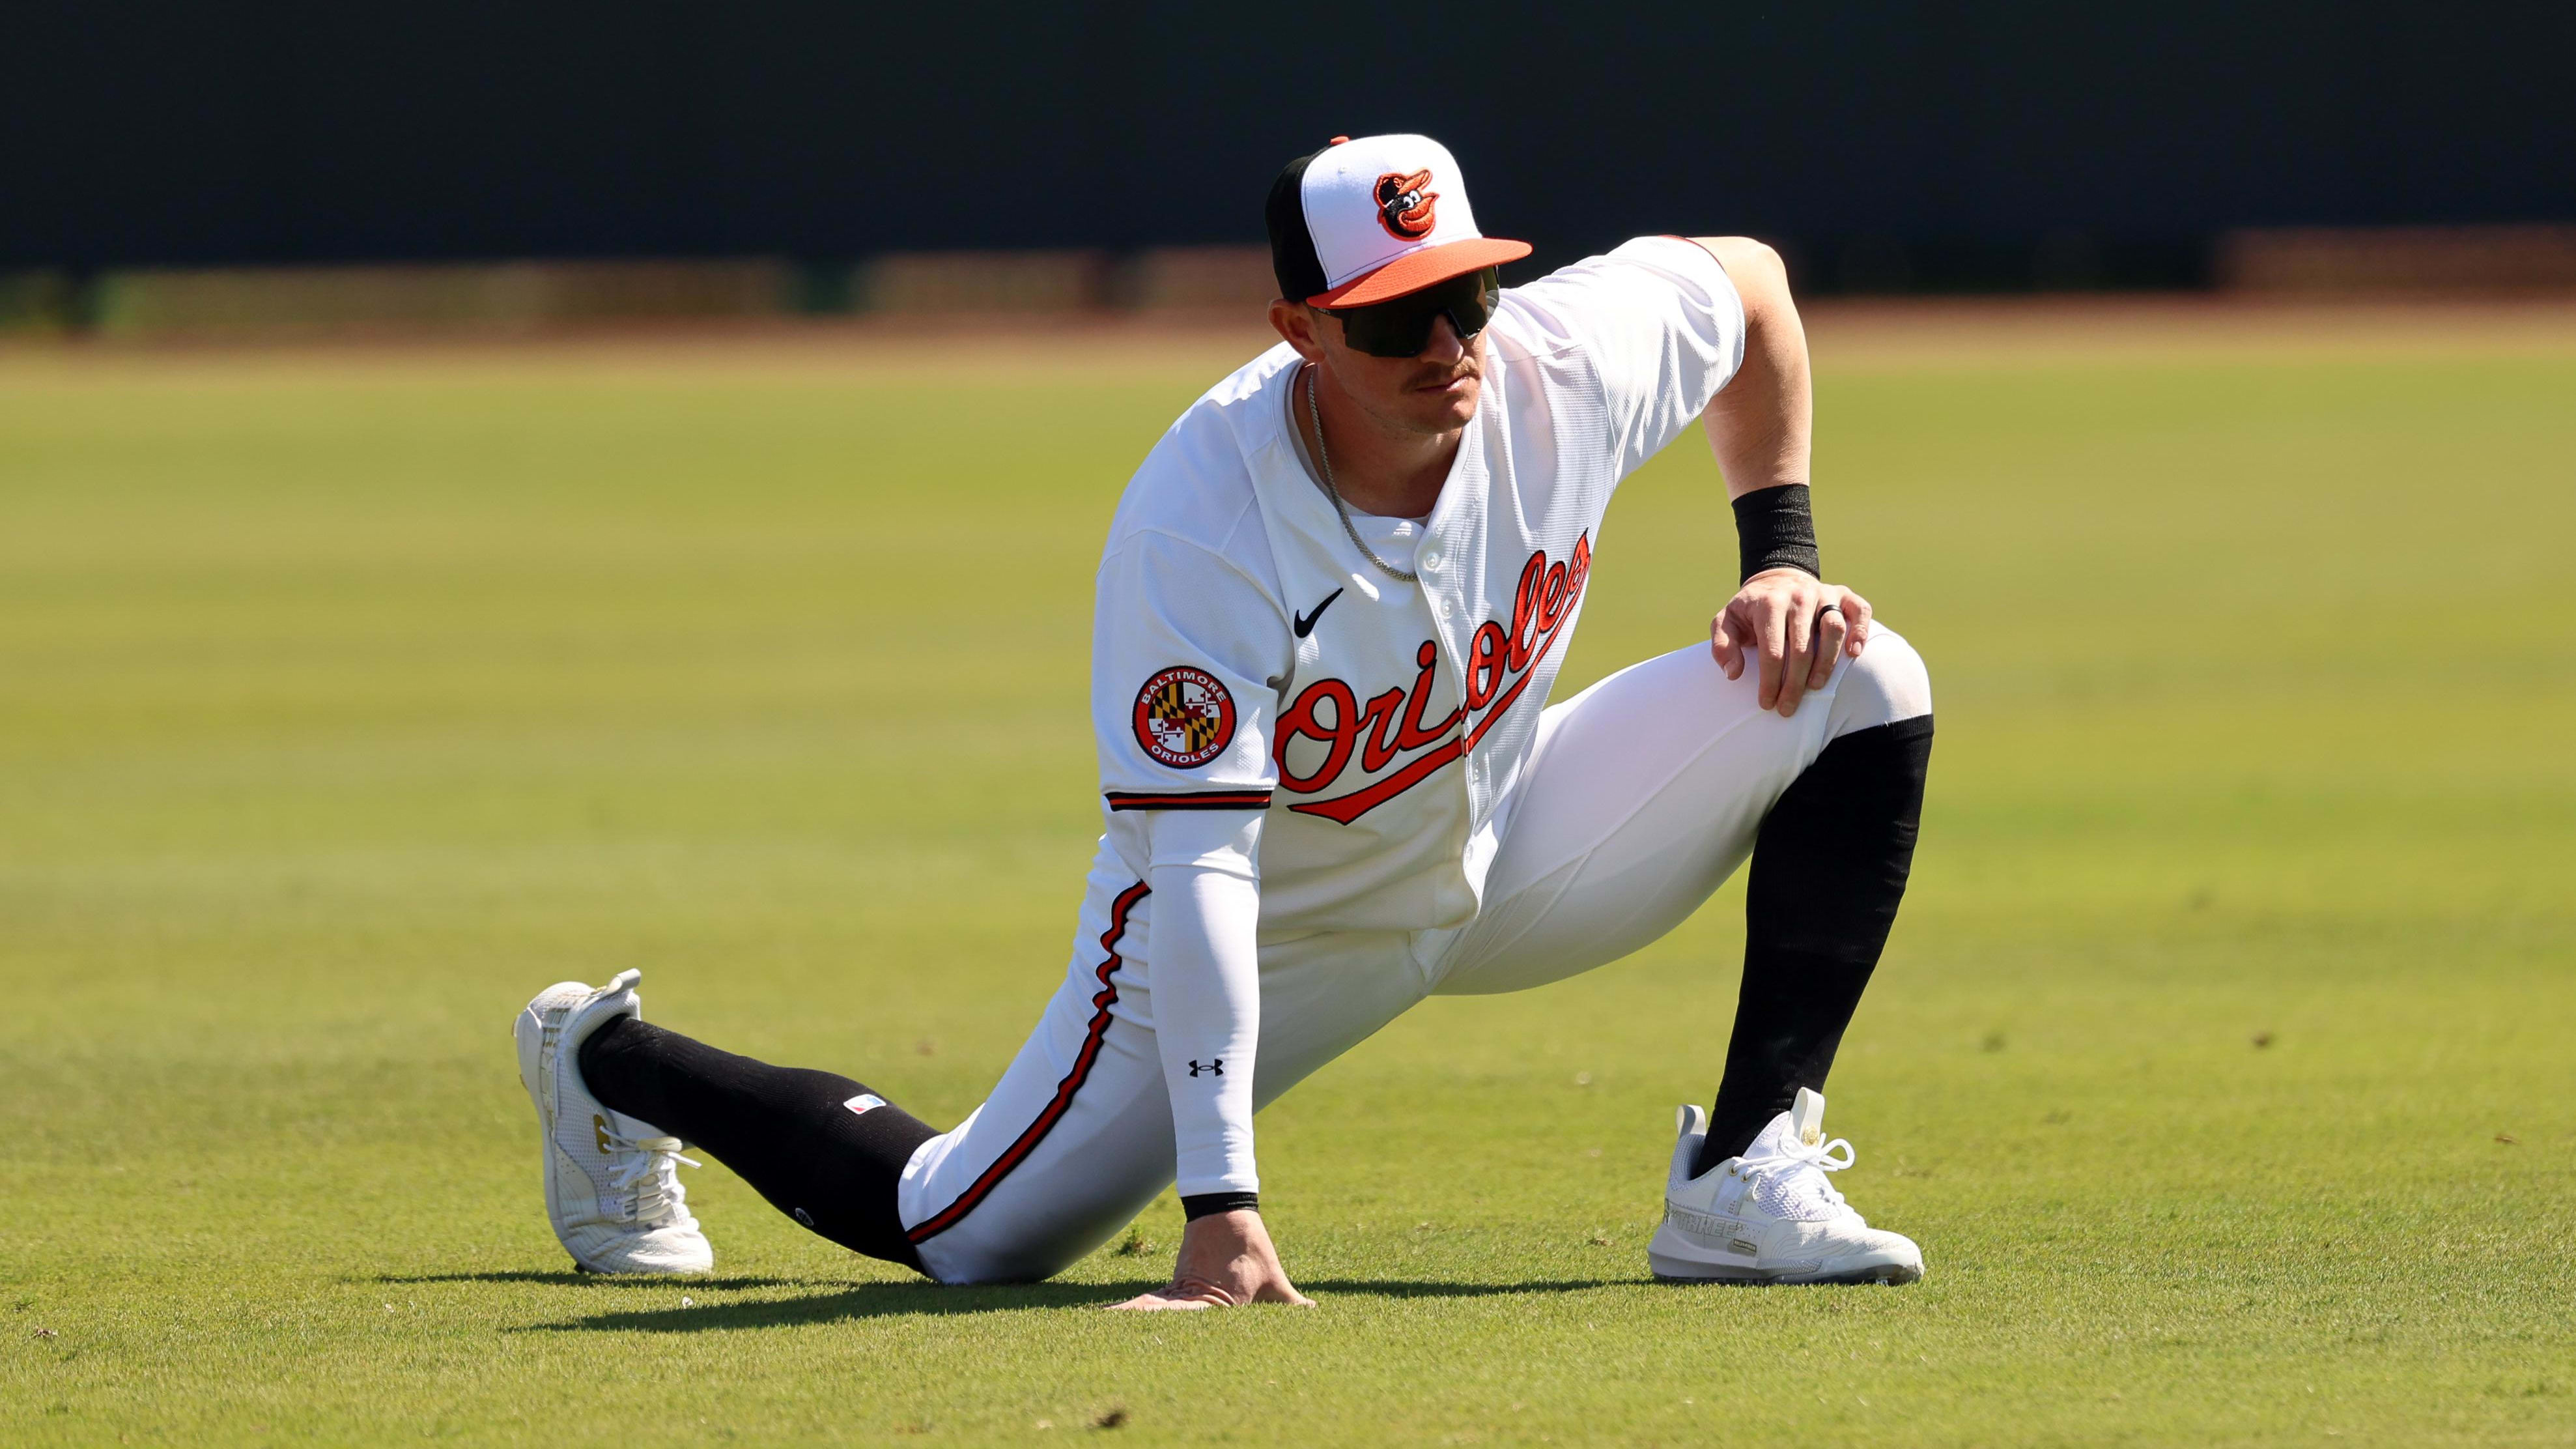 Baltimore Orioles Injured Outfielder Takes Important Steps in Recovery Effort